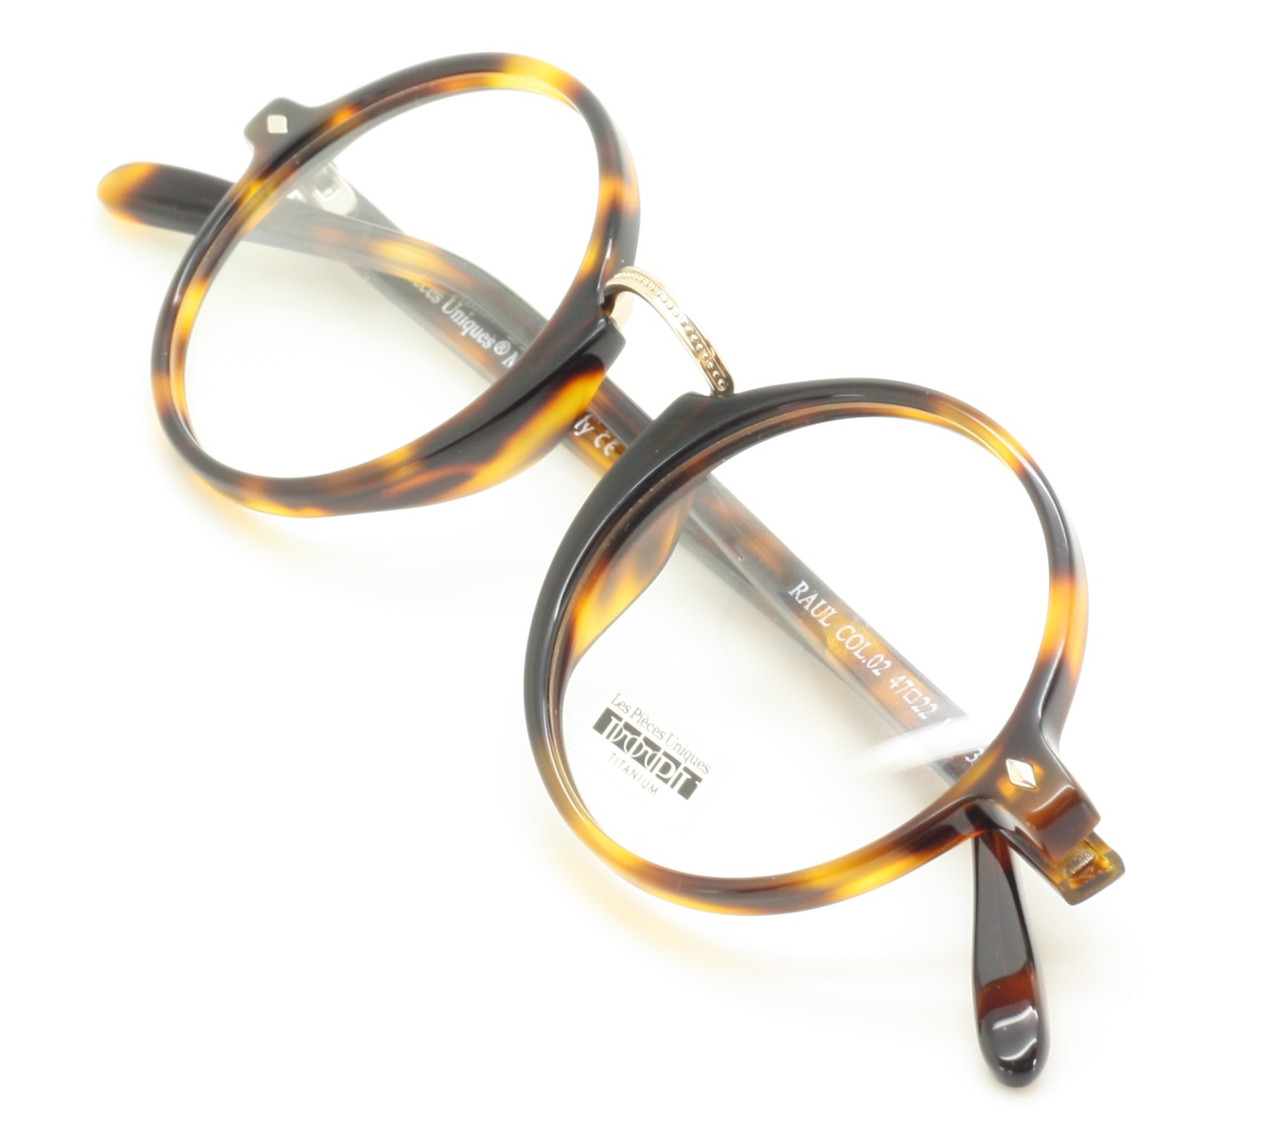 RAUL By Les Pieces Uniques Round Classic Glasses In Tortoiseshell Effect Acetate With Gold Metal Details Lens Size 47mm